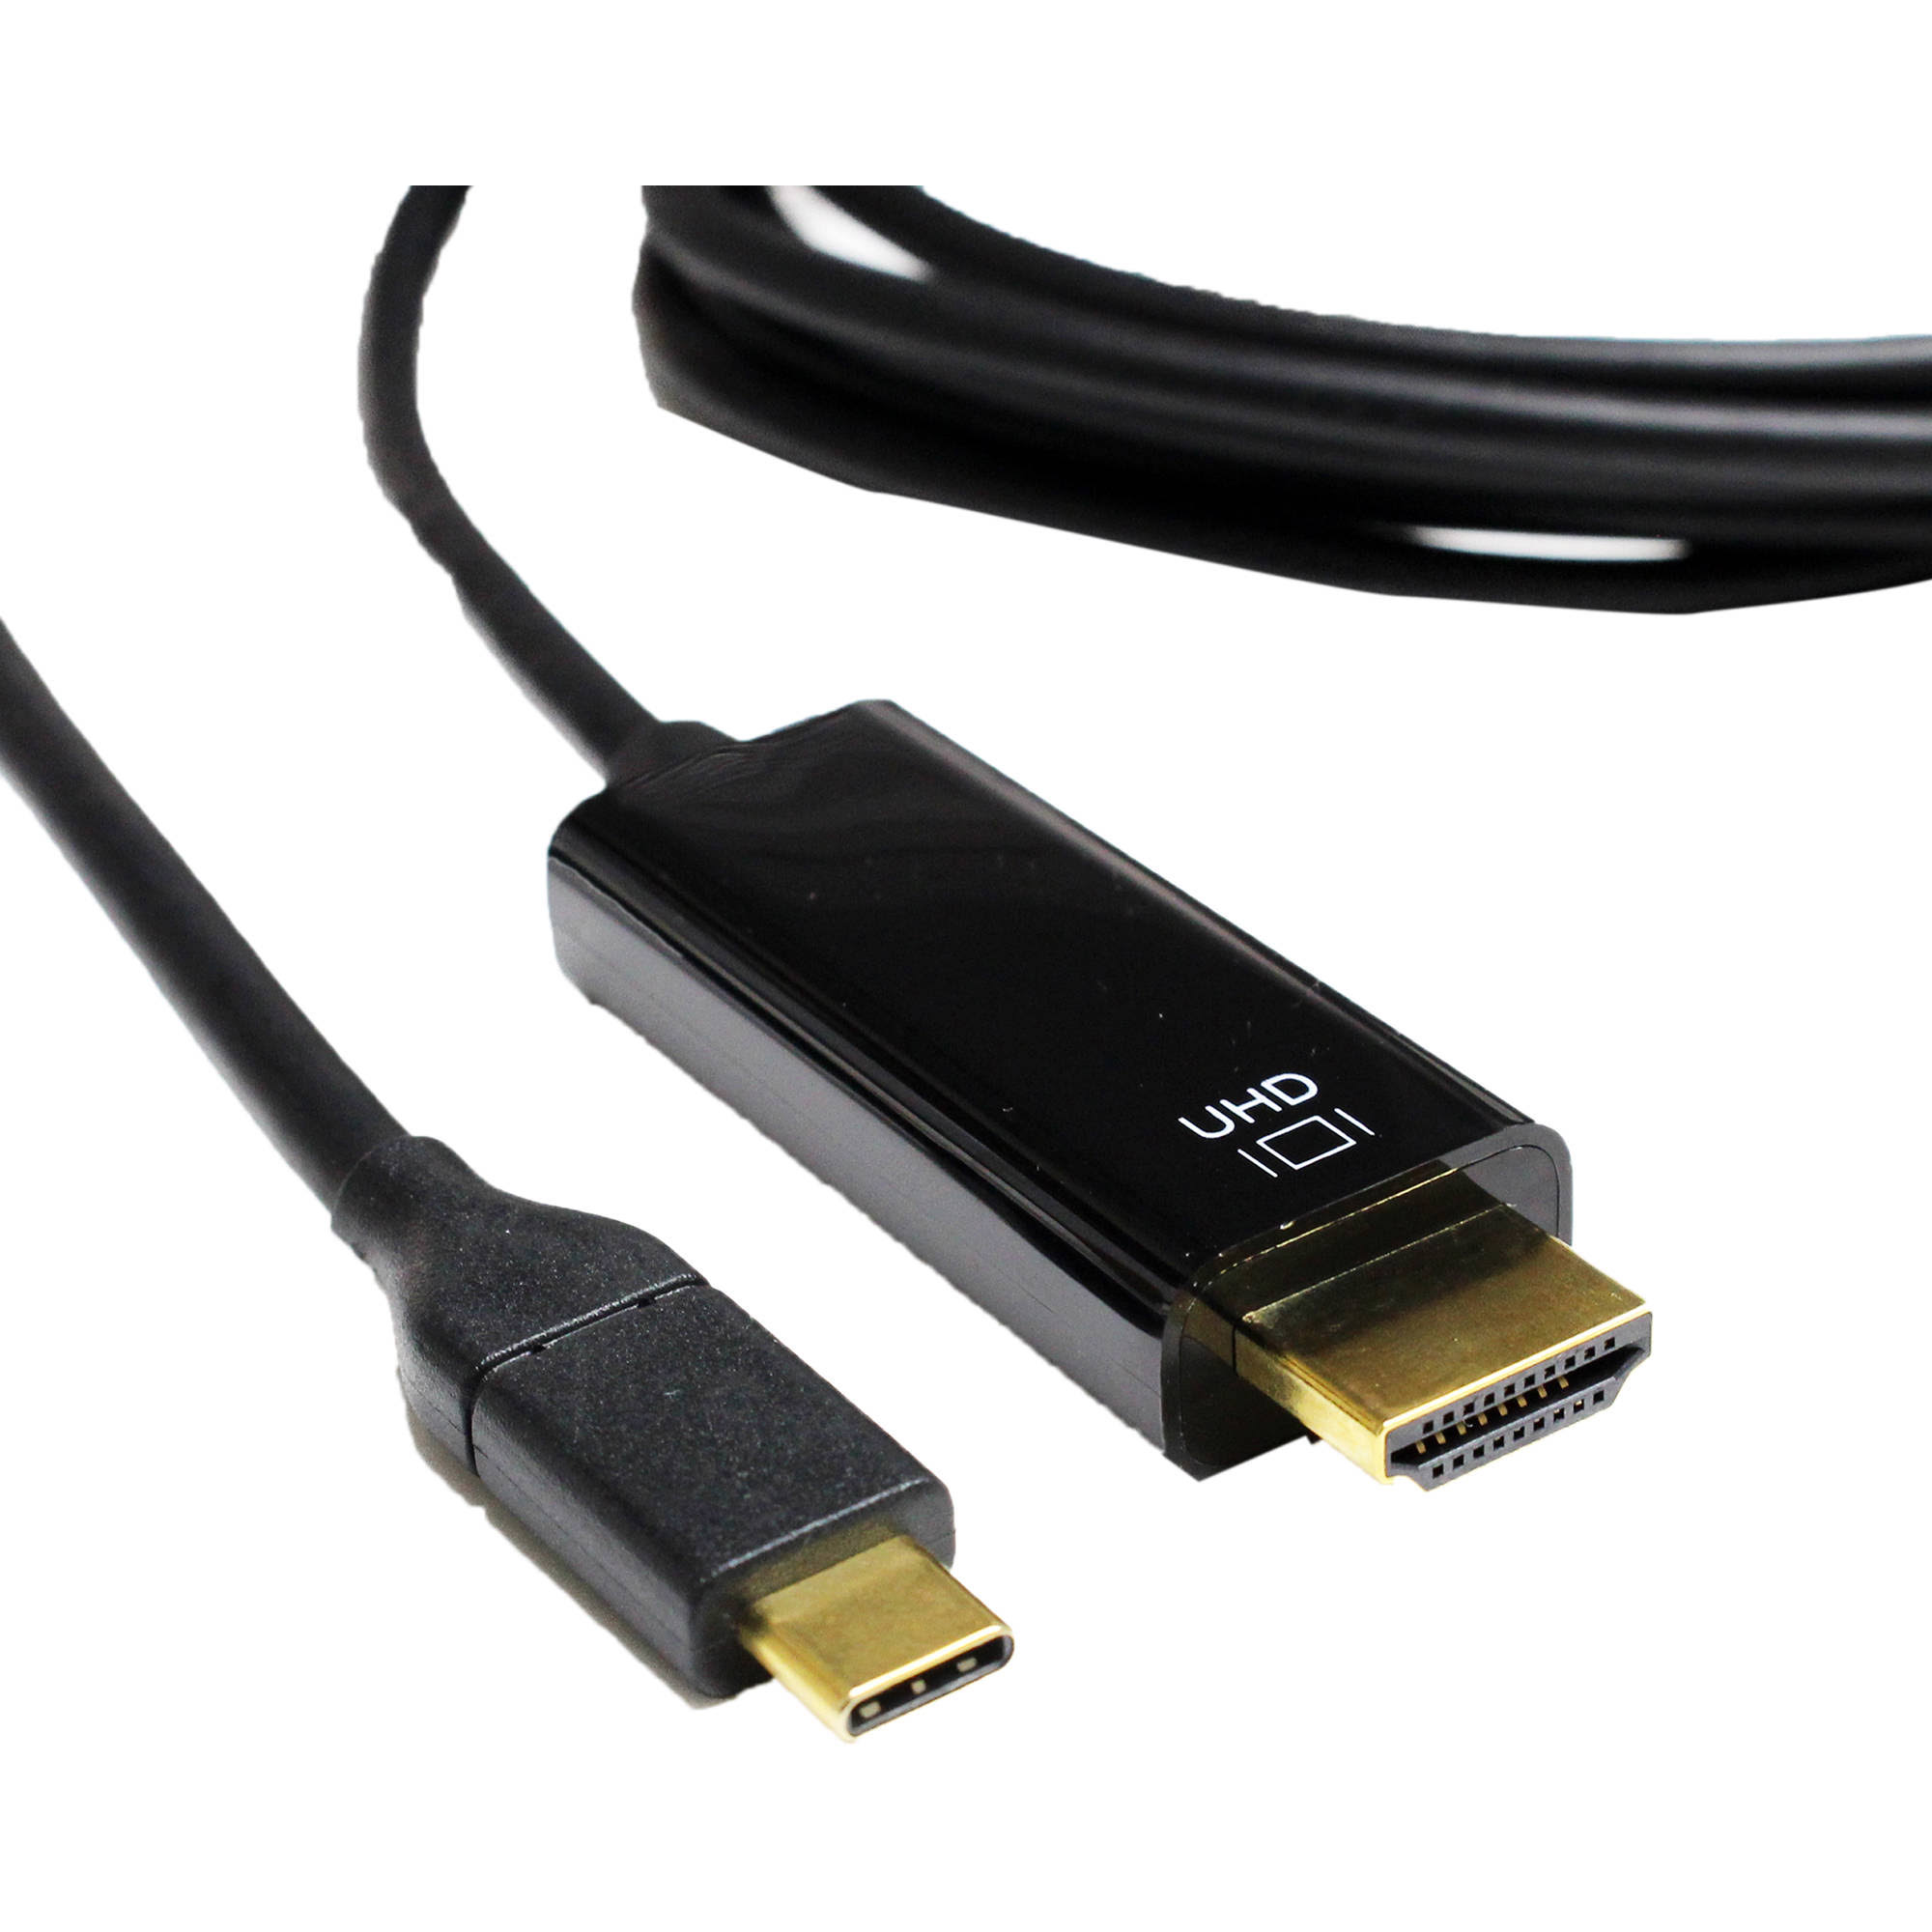 Tera Grand USB Type-C to HDMI Cable 6', harge and Data Speed 3.2 Gen 1 5Gb/s, Male Length 6' 1.8